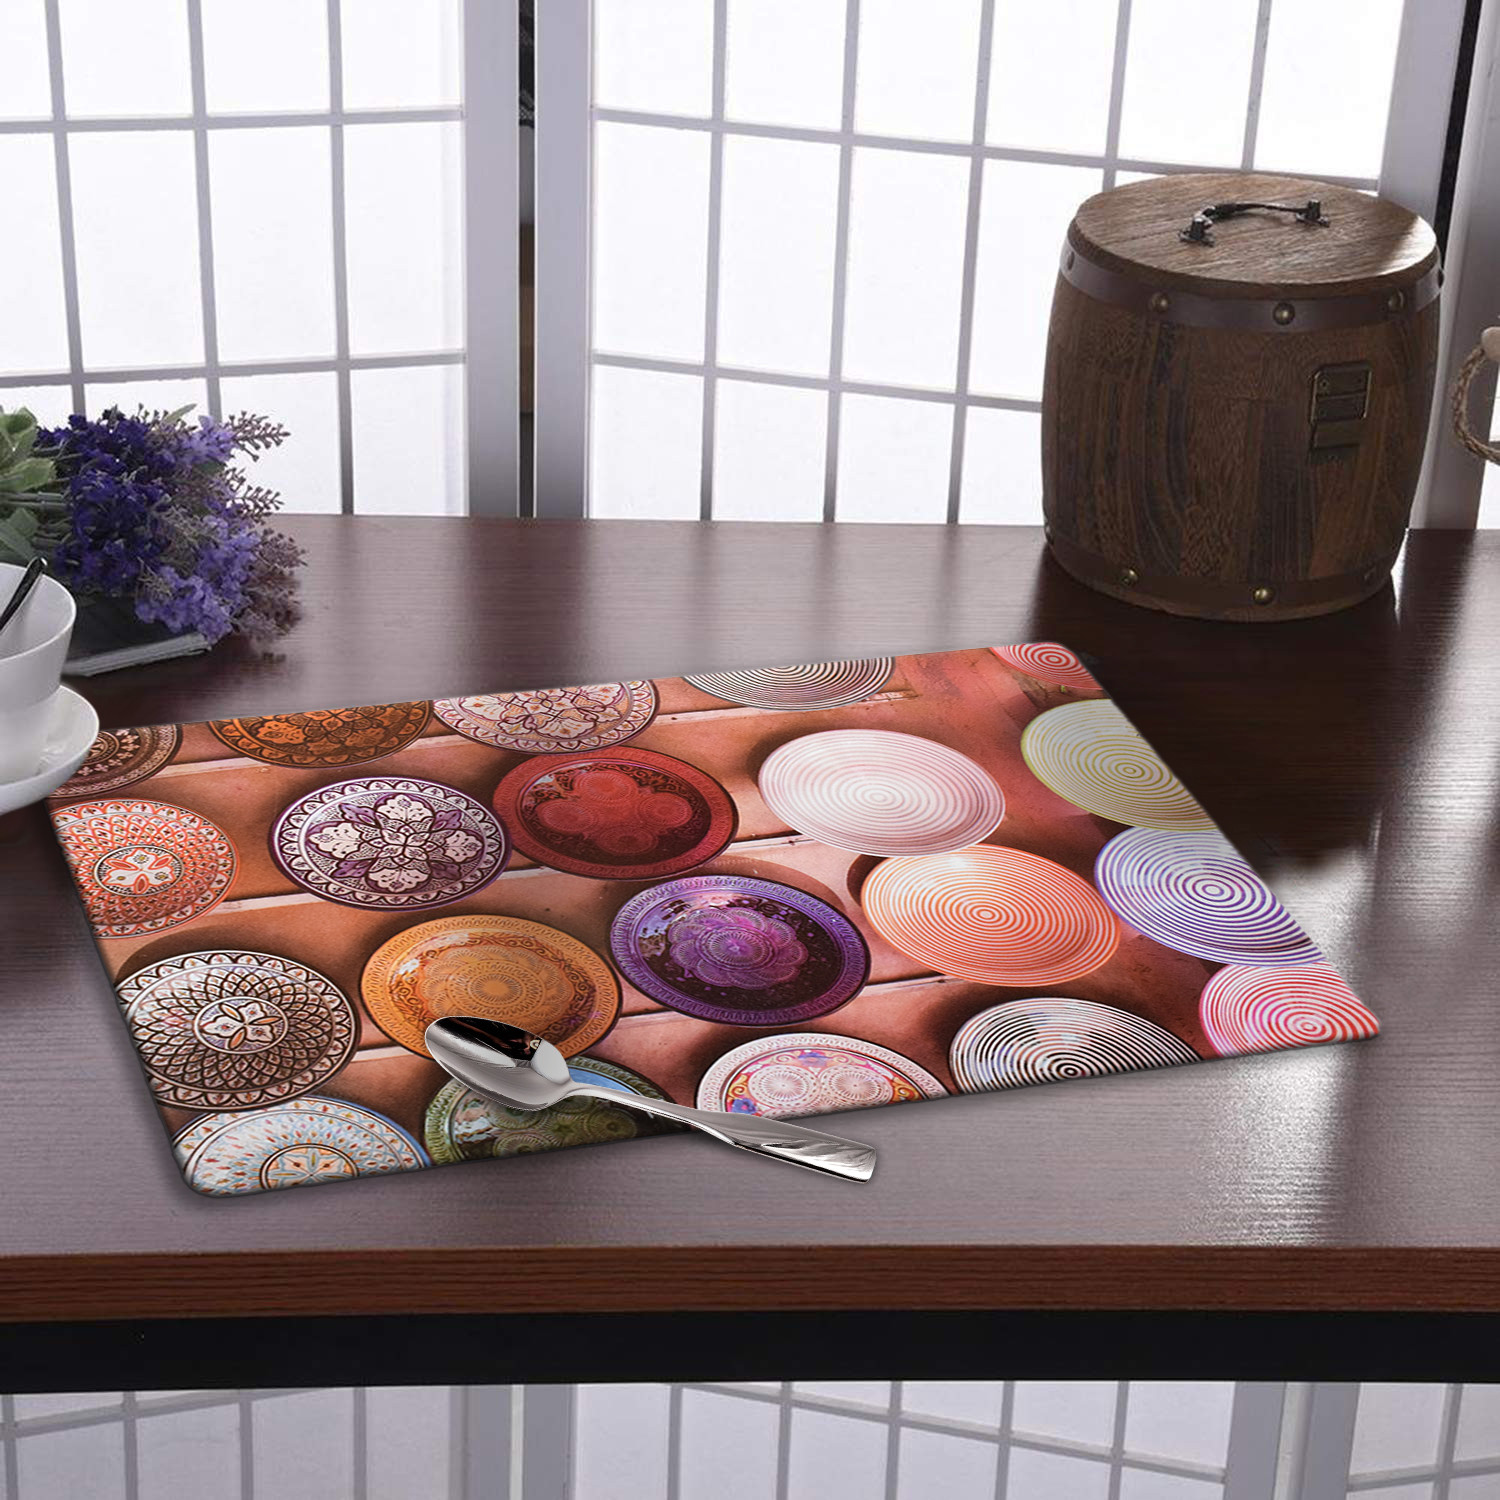 Kuber Industries Plates Print PVC Table Mats /Placemat With 6 Coasters For kitchen, Dining Table Set of 6 (Peach) 54KM4381